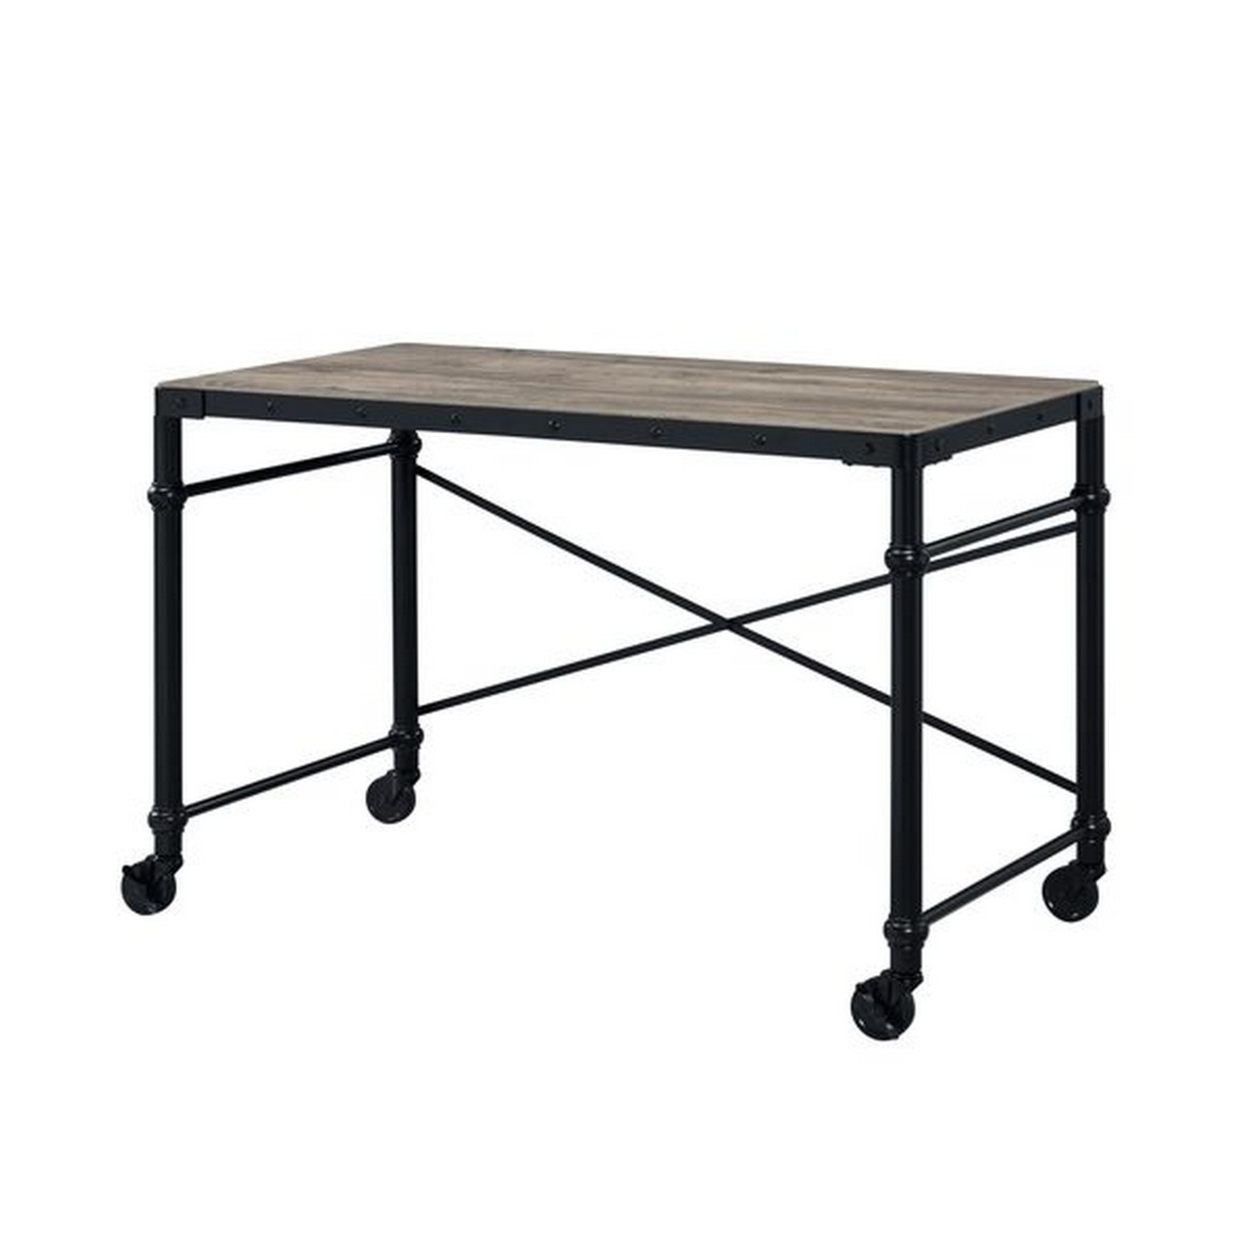 Writing Desk With Casters And Nail Accents, Black- Saltoro Sherpi